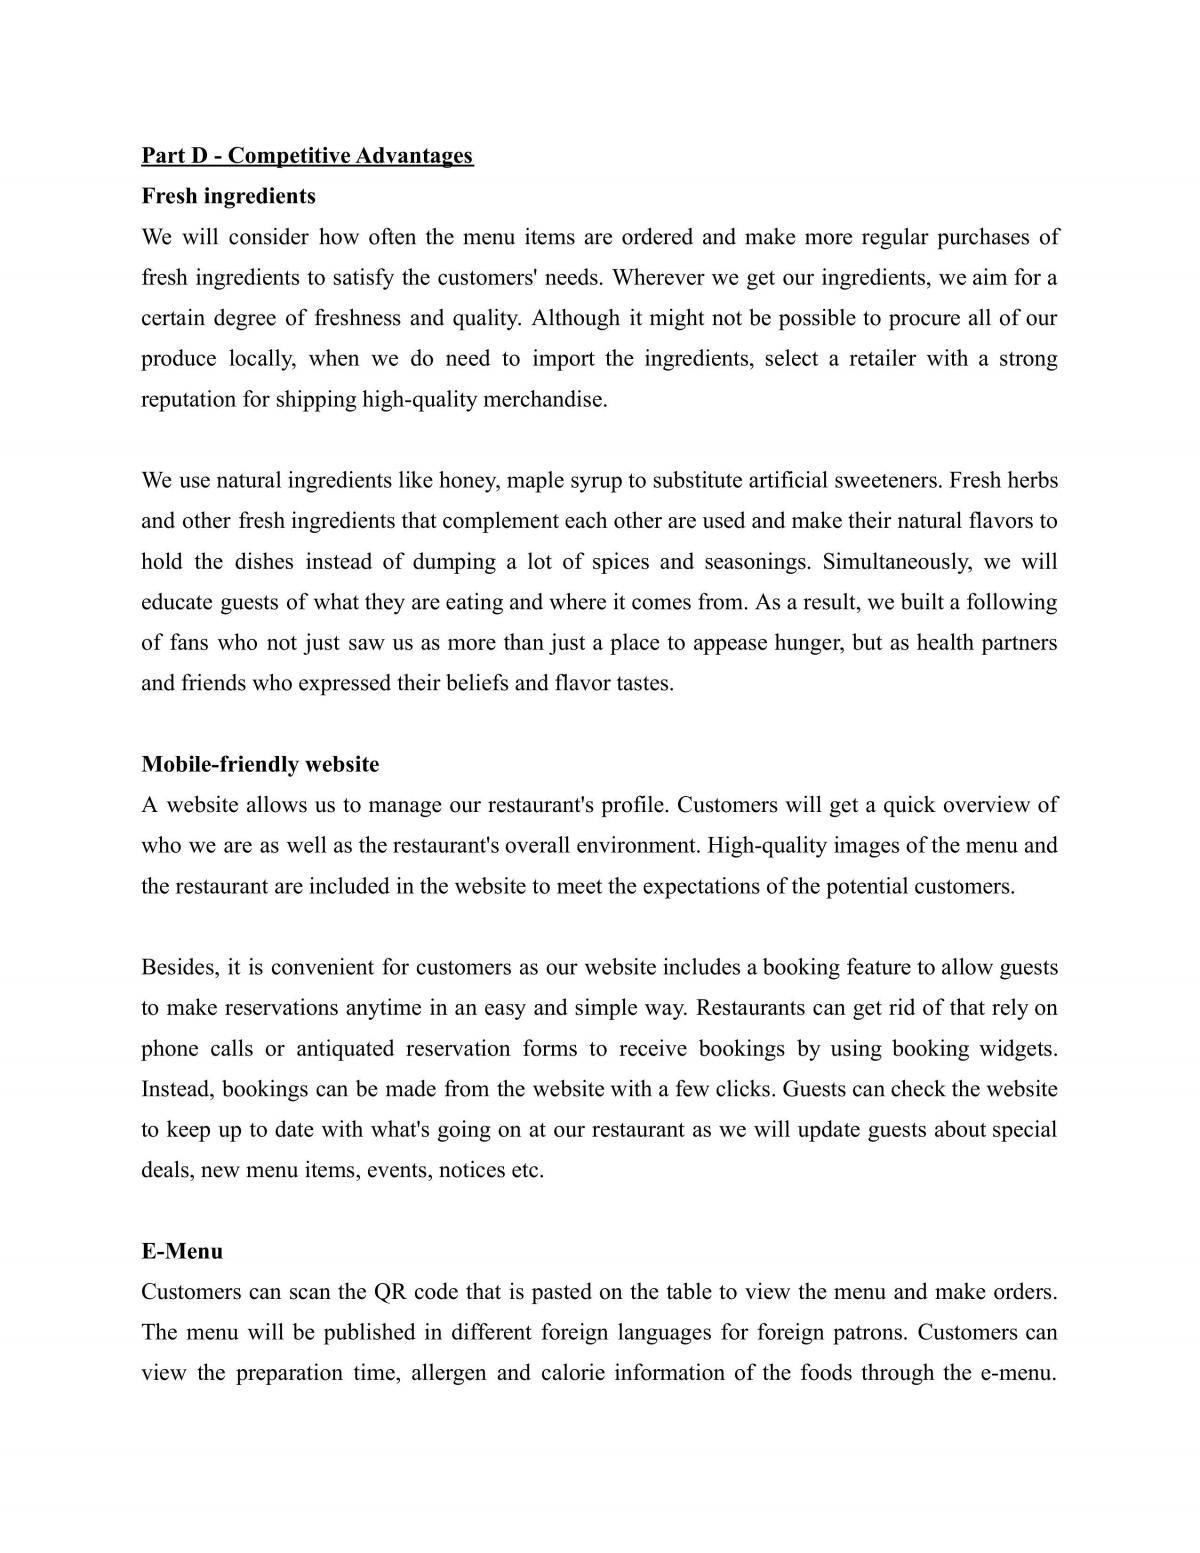  Analysis and evaluation of a mixed cuisine vegetarian restaurant (VEGS)'s operation  - Page 16